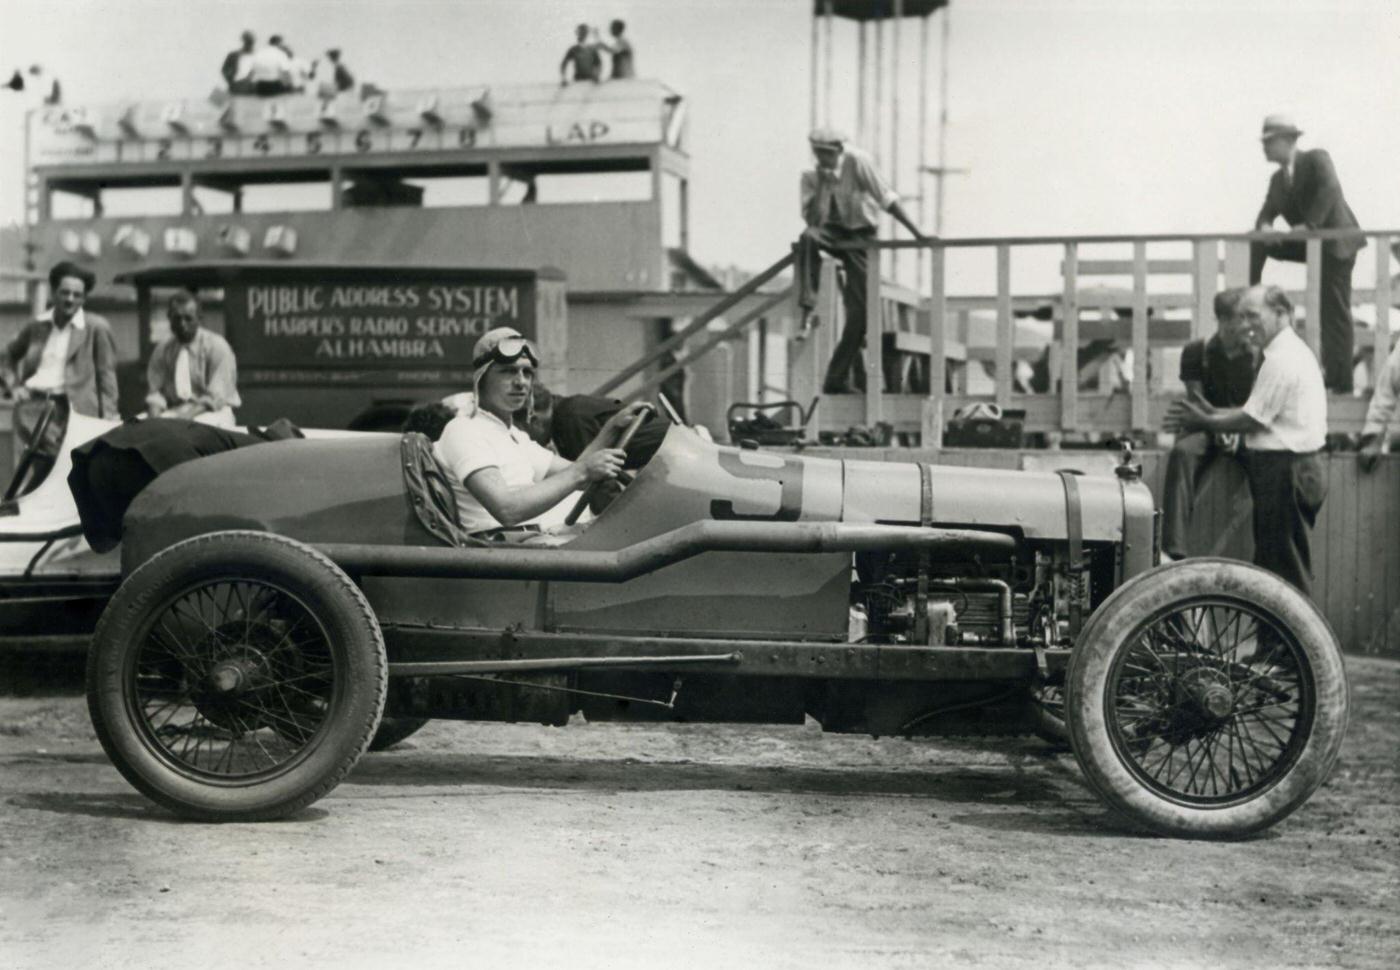 Joe Crocker poses in a race car at the speedway with a group of spectators milling about in the background, 1935.